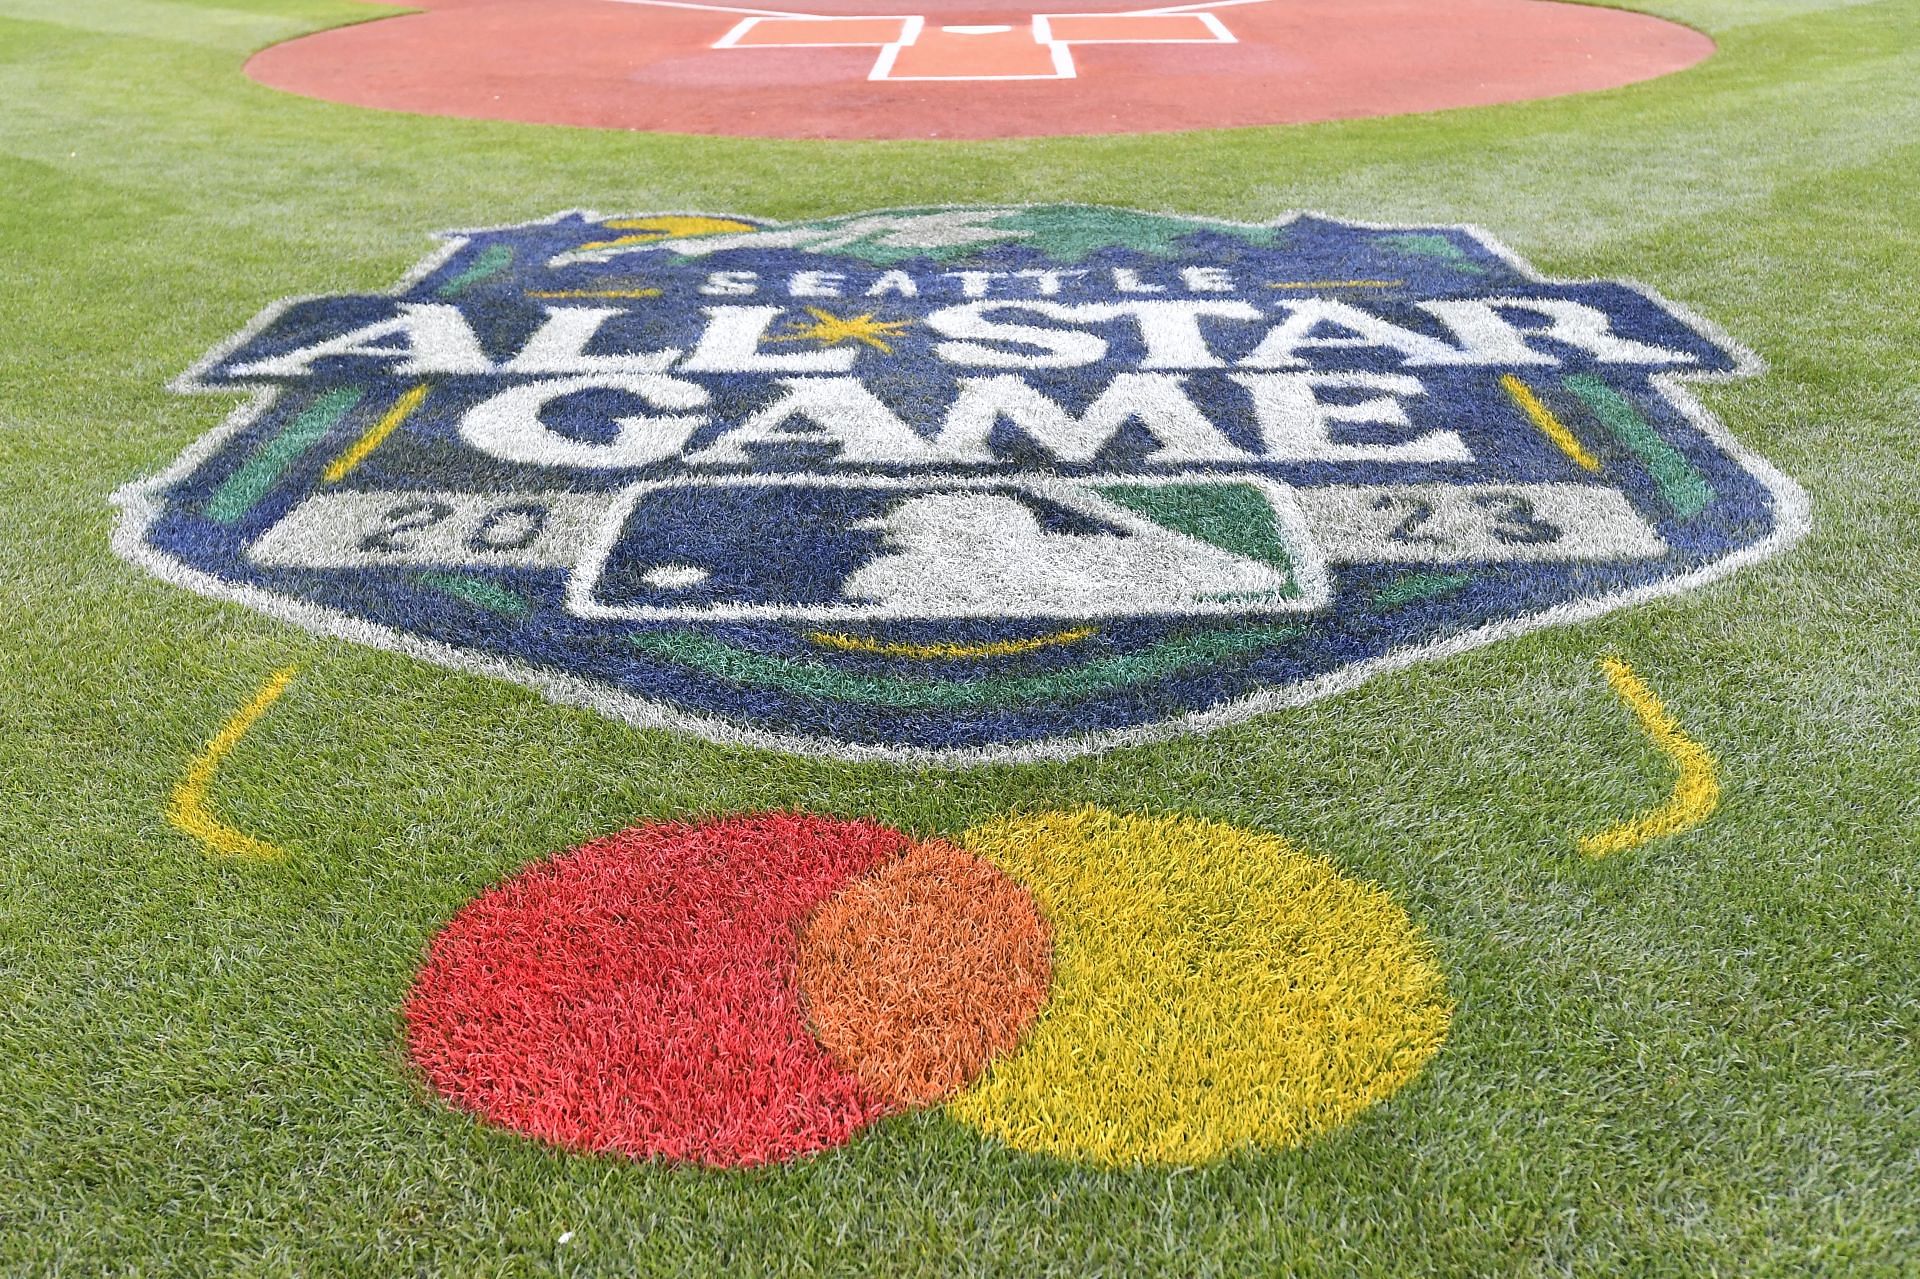 MLB cancels All-Star Game for 1st time since 1945